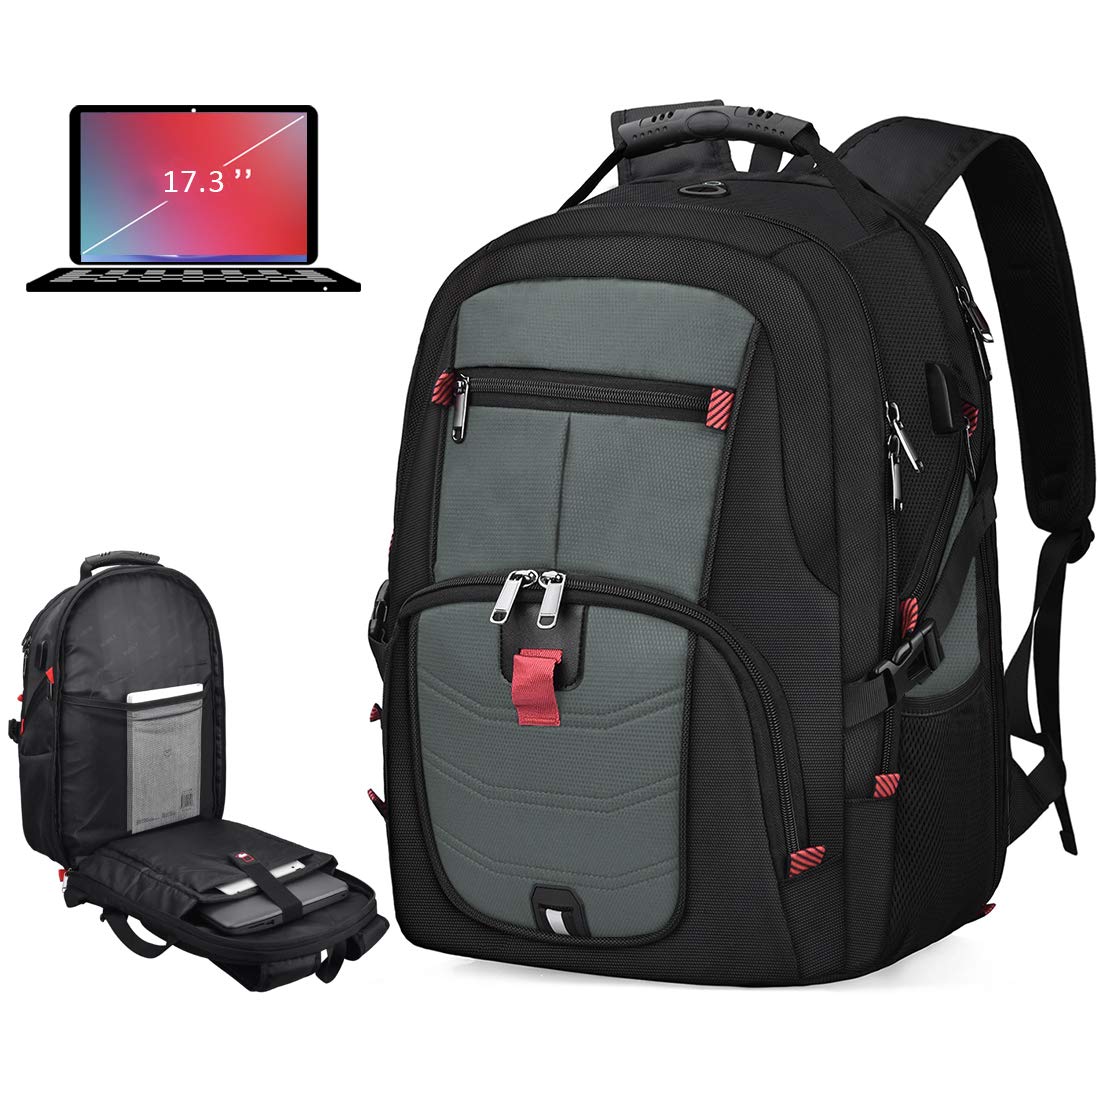 NUBILY Laptop Backpack 17 Inch Waterproof Extra Large TSA Travel Backpack Anti Theft College Business Mens Backpacks with USB Charging Port 17.3 Gaming Computer Backpack for Women Men 45L Grey